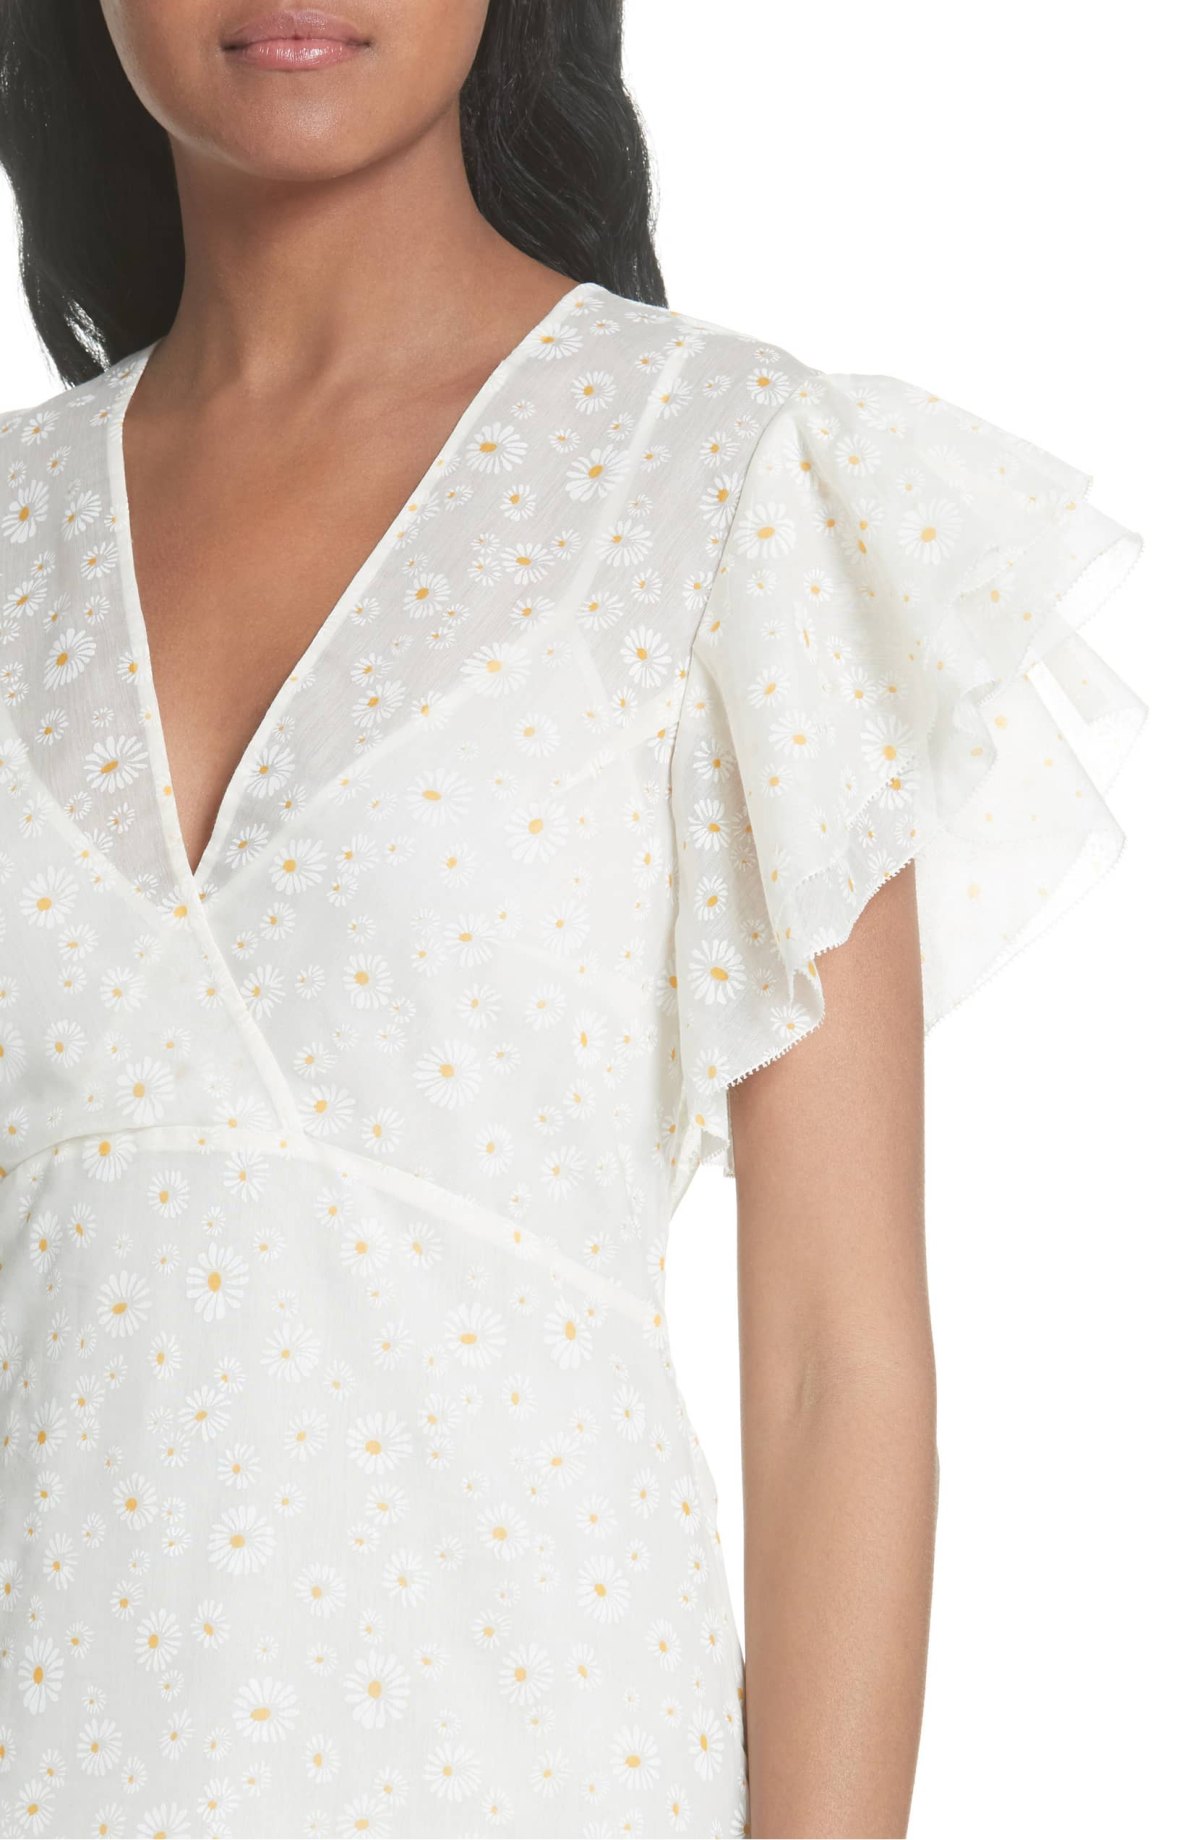 Shop This Tory Burch Daisy Print Dress on Sale at Nordstrom